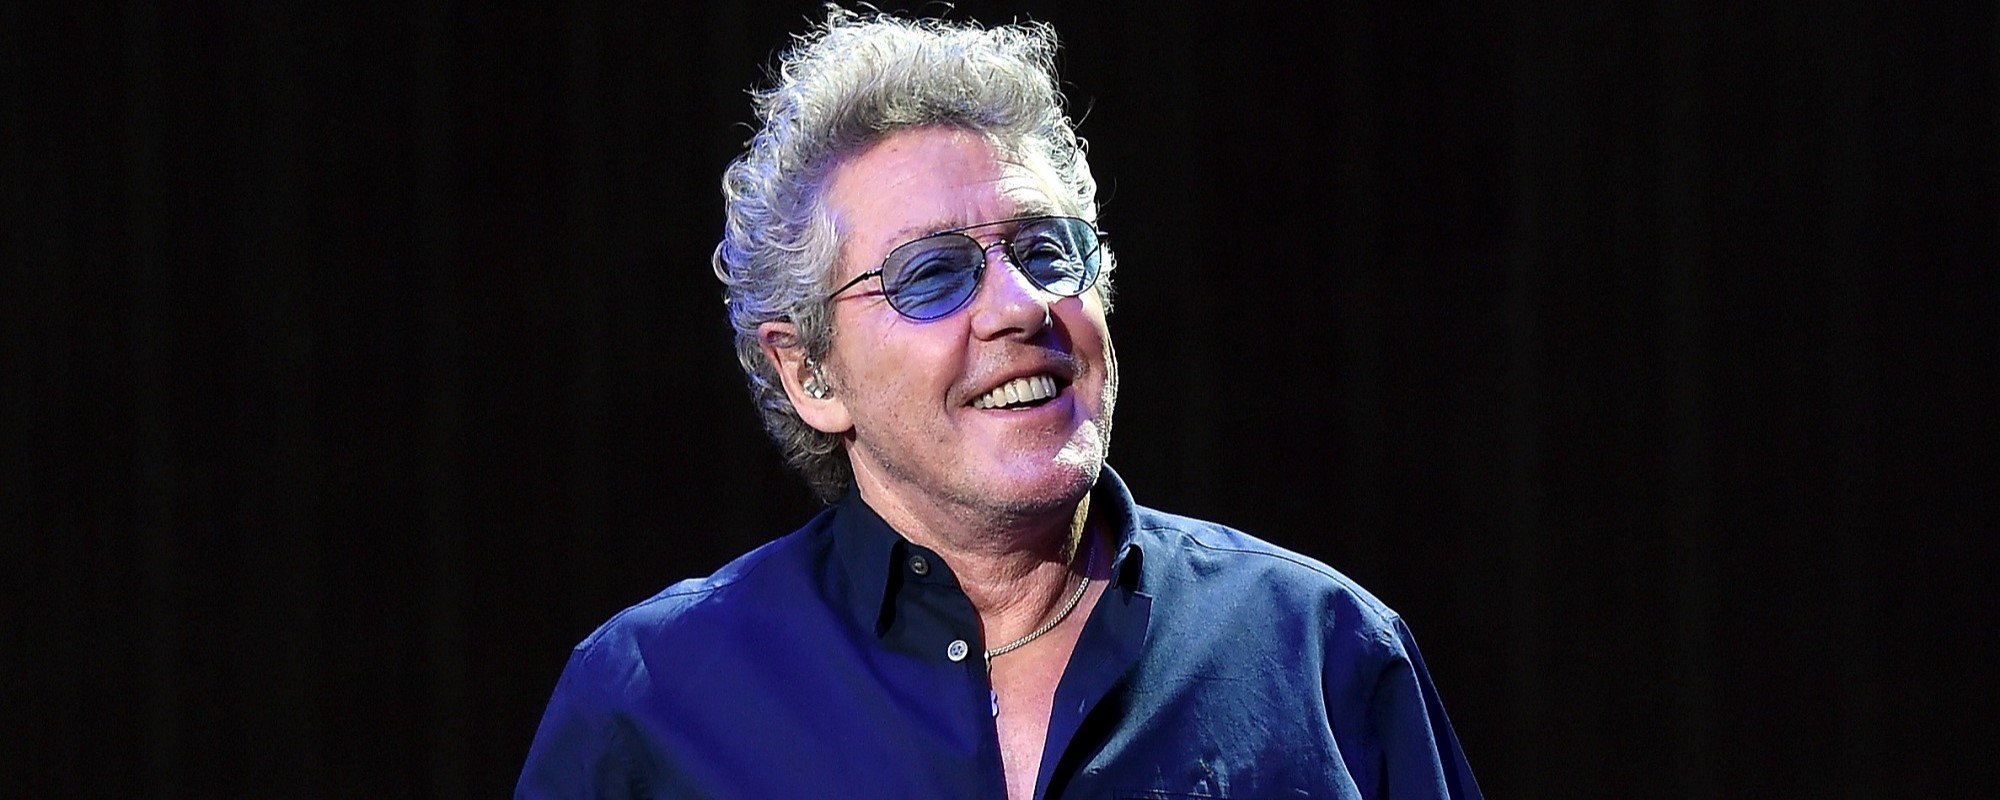 See Me, Drink Me: The Who’s Roger Daltrey Celebrating His 80th Birthday with His Own Beer